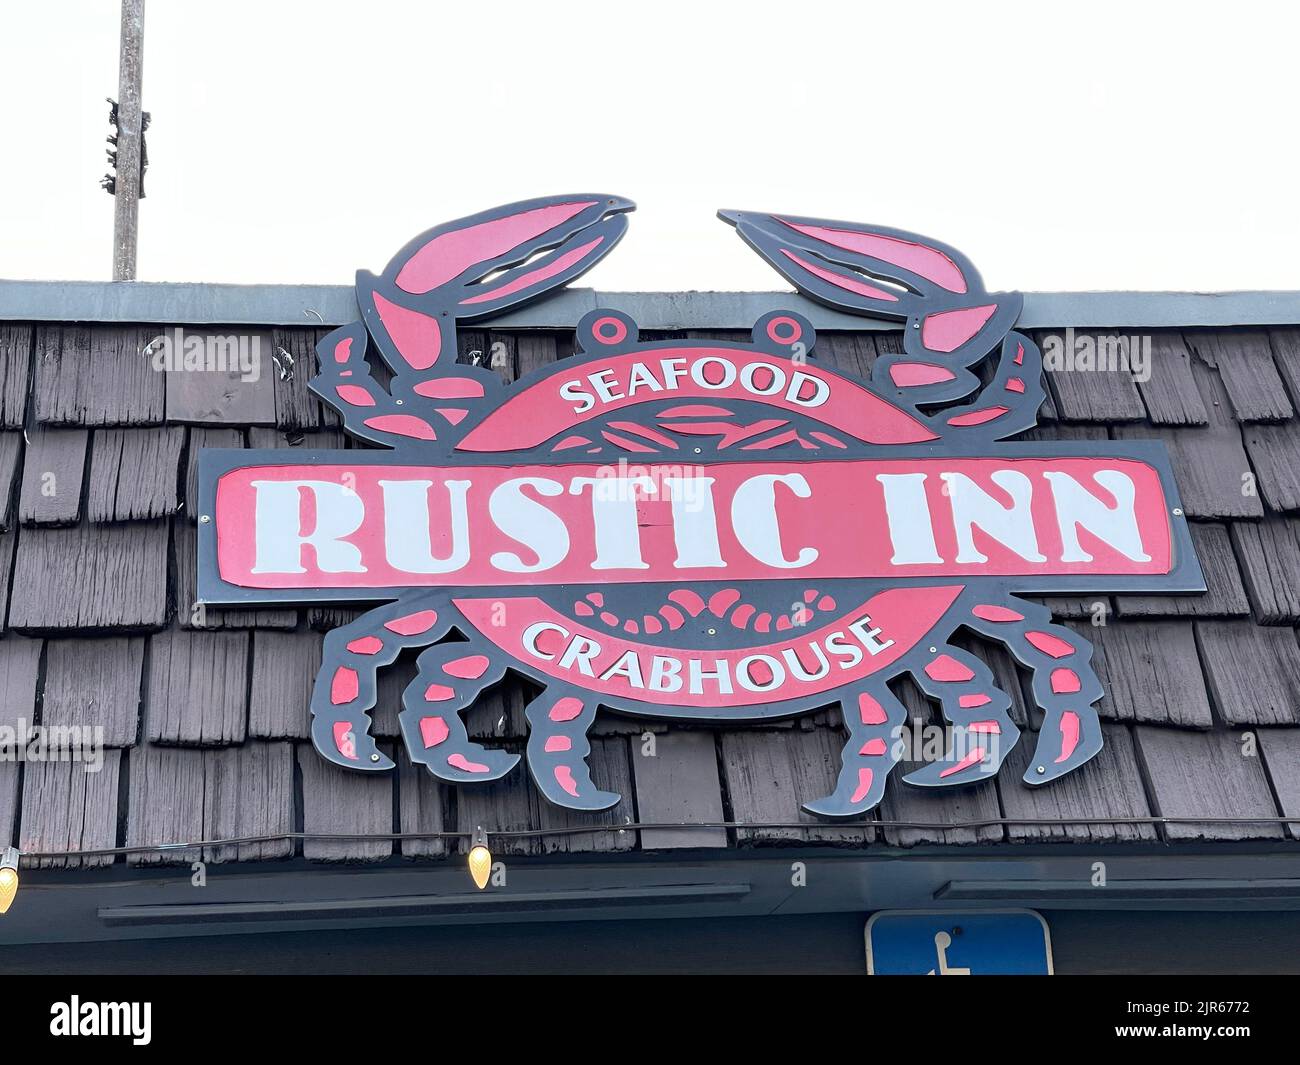 FORT LAUDERDALE, FL - AUGUST 22: Rustic Inn Crabhouse remains packed even after A Florida man died after he caught a bacterial infection from a 'one in a billion' bad oyster, according to a report. The death was traced back to the Rustic Inn Crabhouse in Fort Lauderdale on August 22, 2022 People: Rustic Inn Crabhouse Credit: Storms Media Group/Alamy Live News Stock Photo